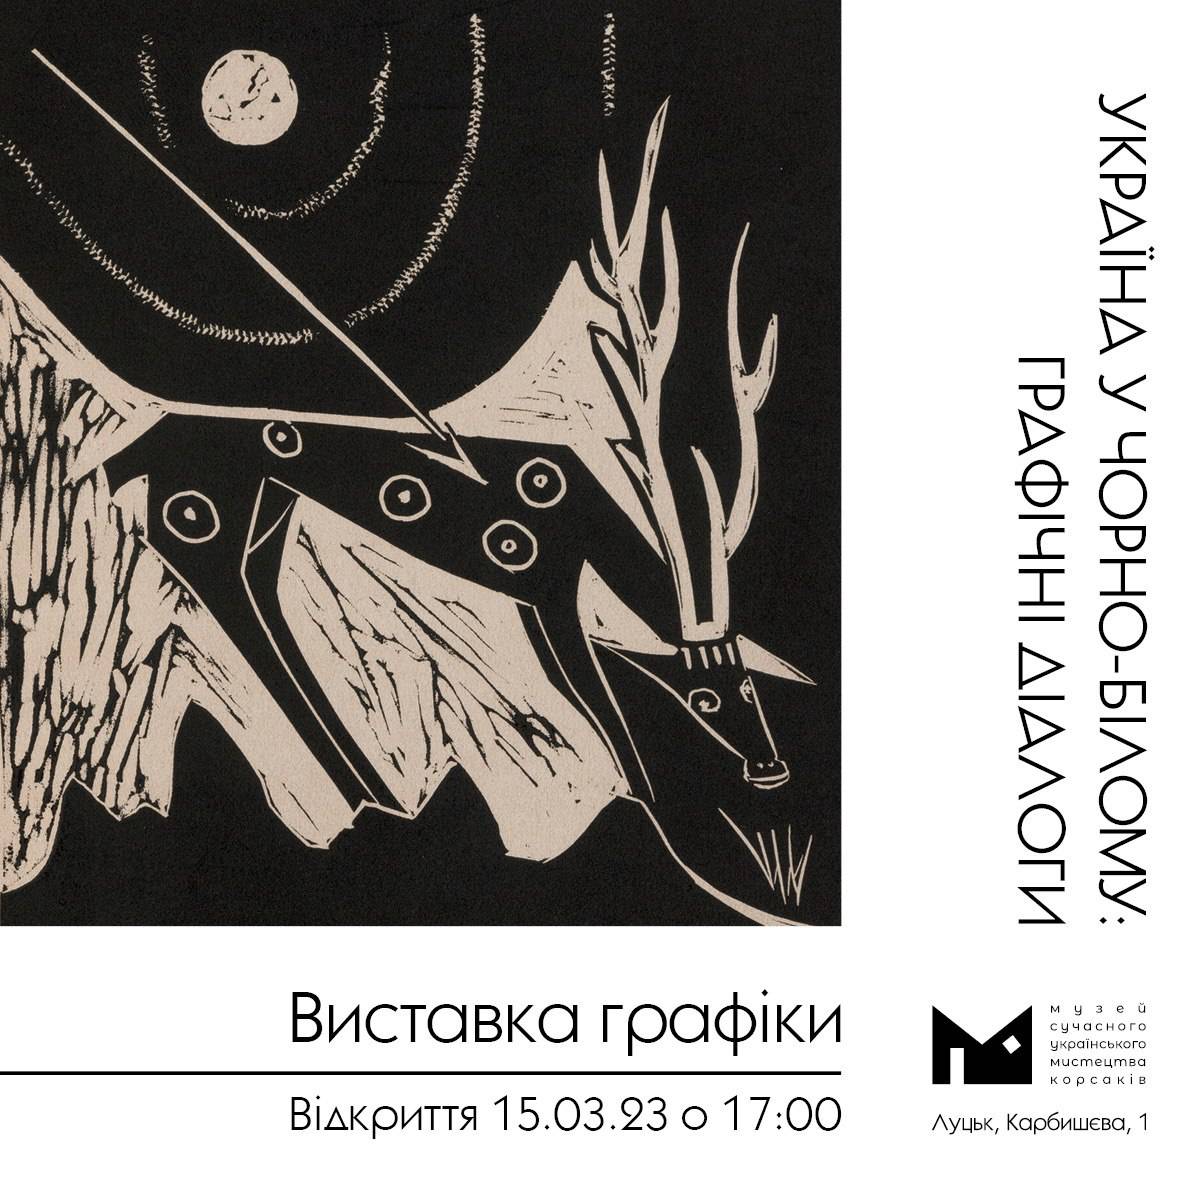 On March 5, at 5:00 p.m., the opening of the graphics exhibition “UKRAINE IN BLACK AND WHITE: GRAPHIC DIALOGUES” will take place in the Korsaks` Museum!